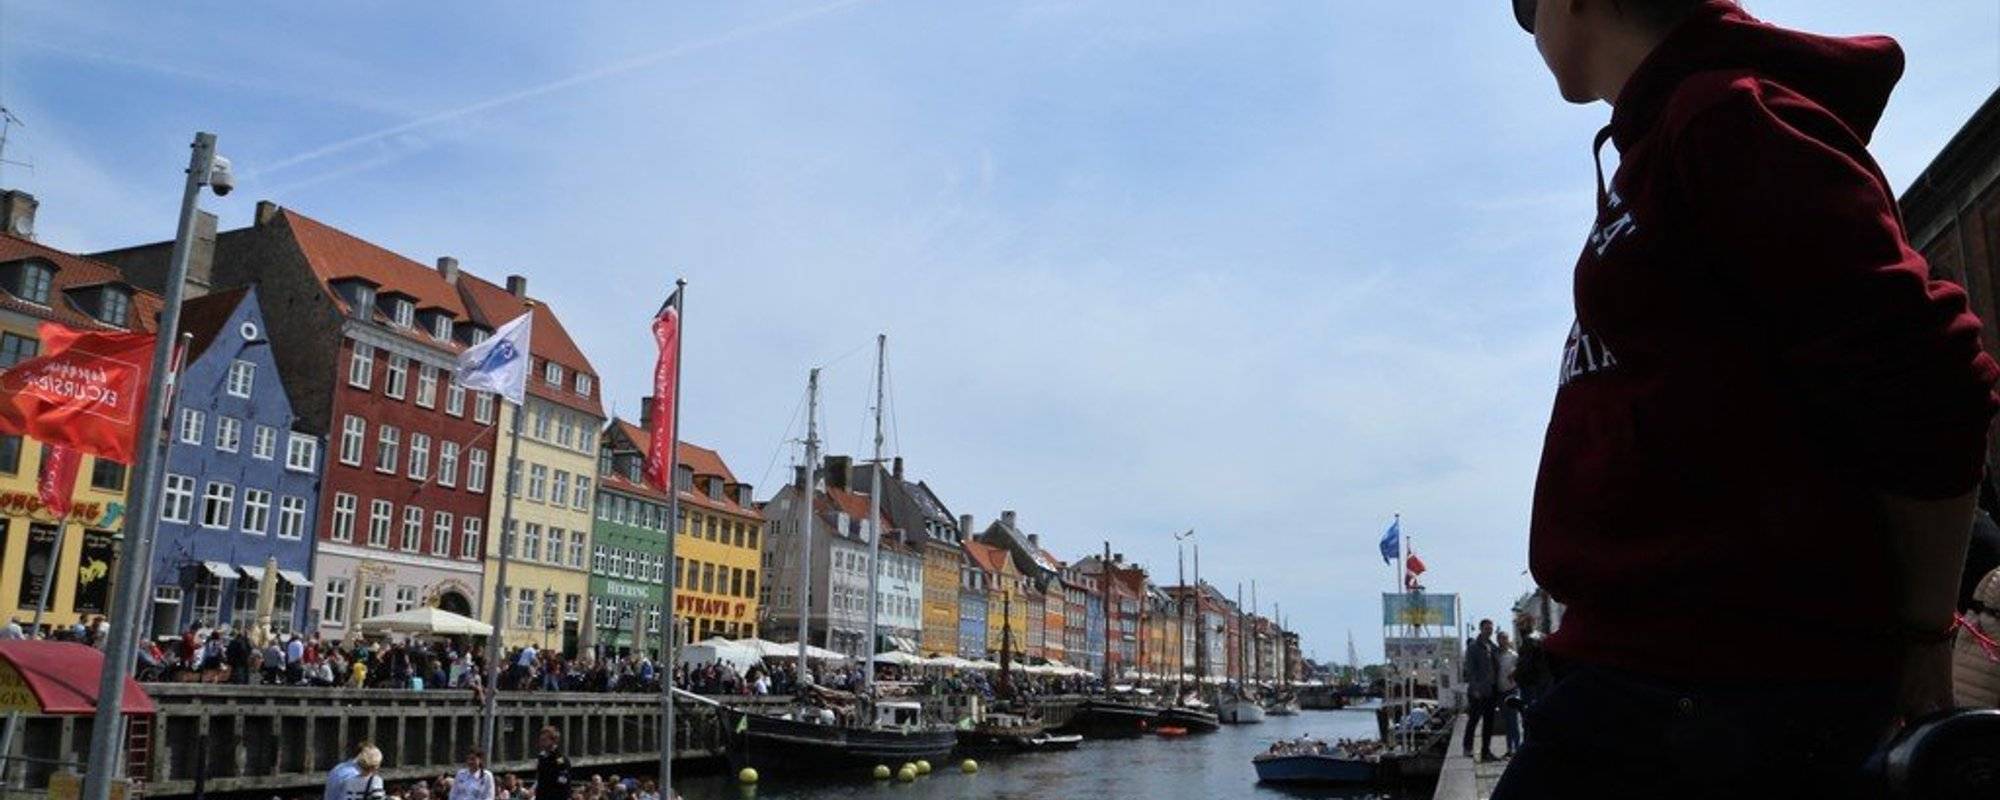 Exploring Copenhagen by bike - These are the top things to do and see in this city!